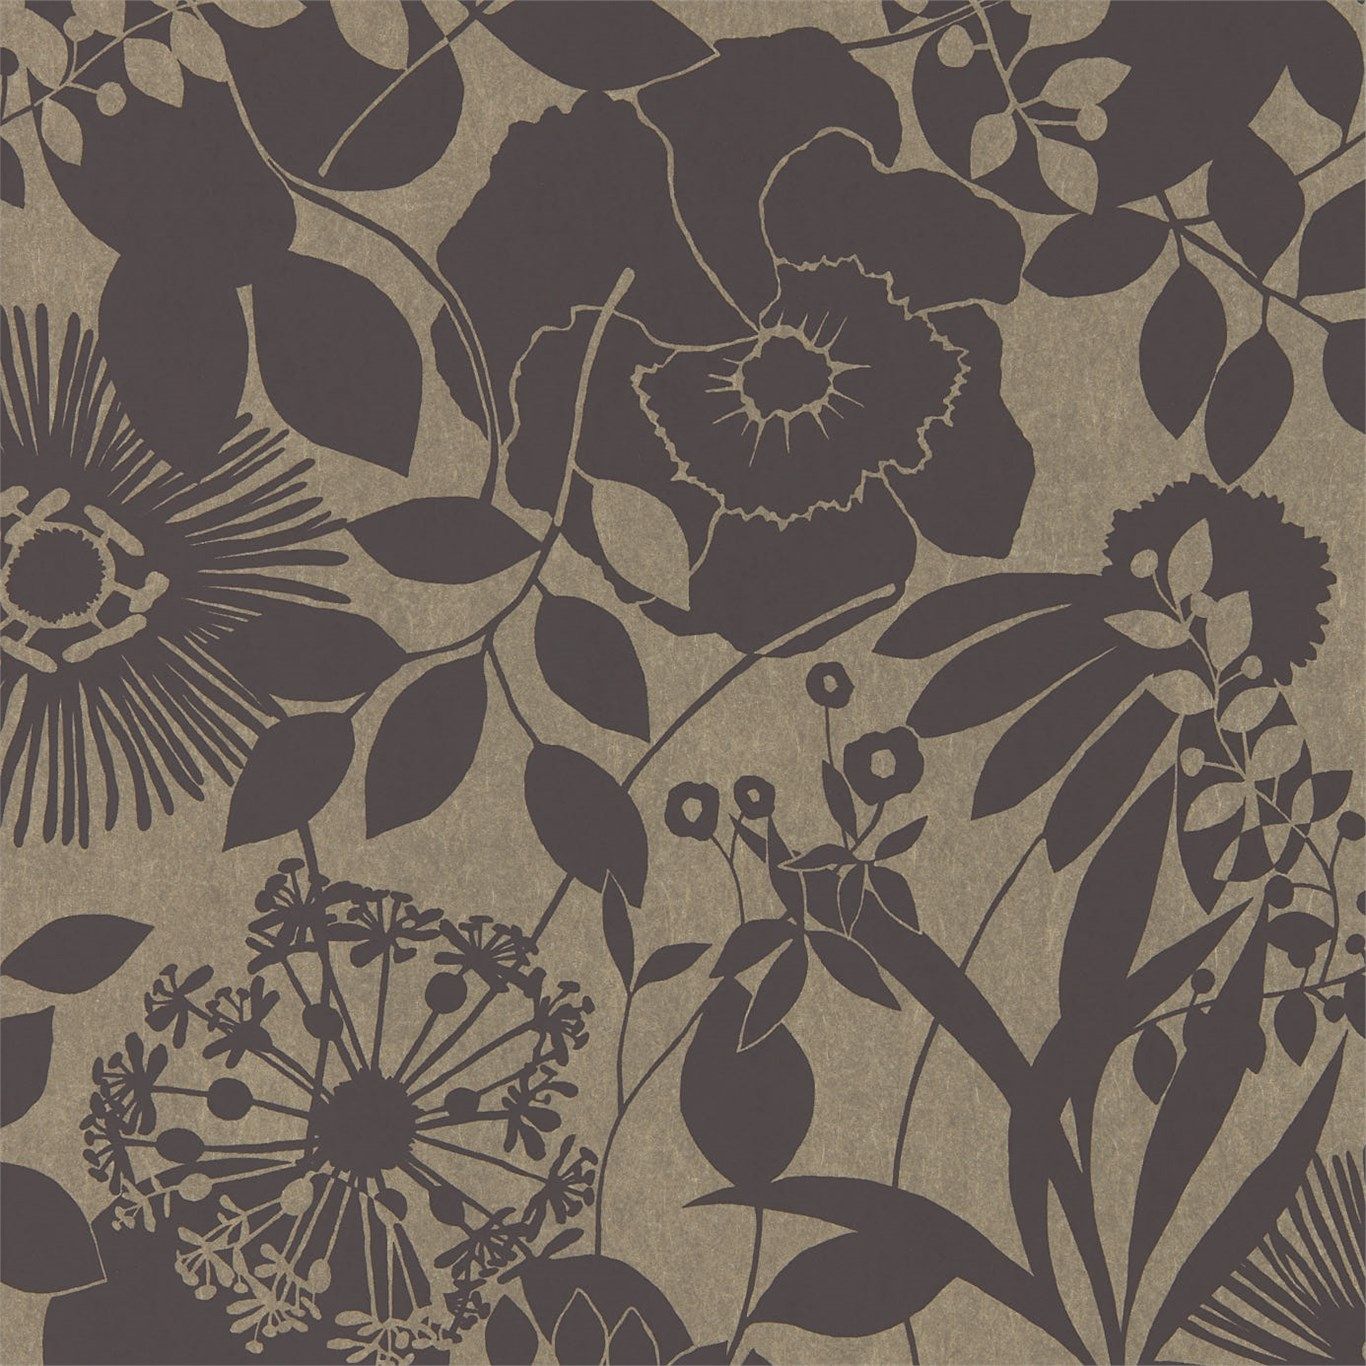 This wallpaper design features a black and brown floral pattern on a tan background. - Coquette